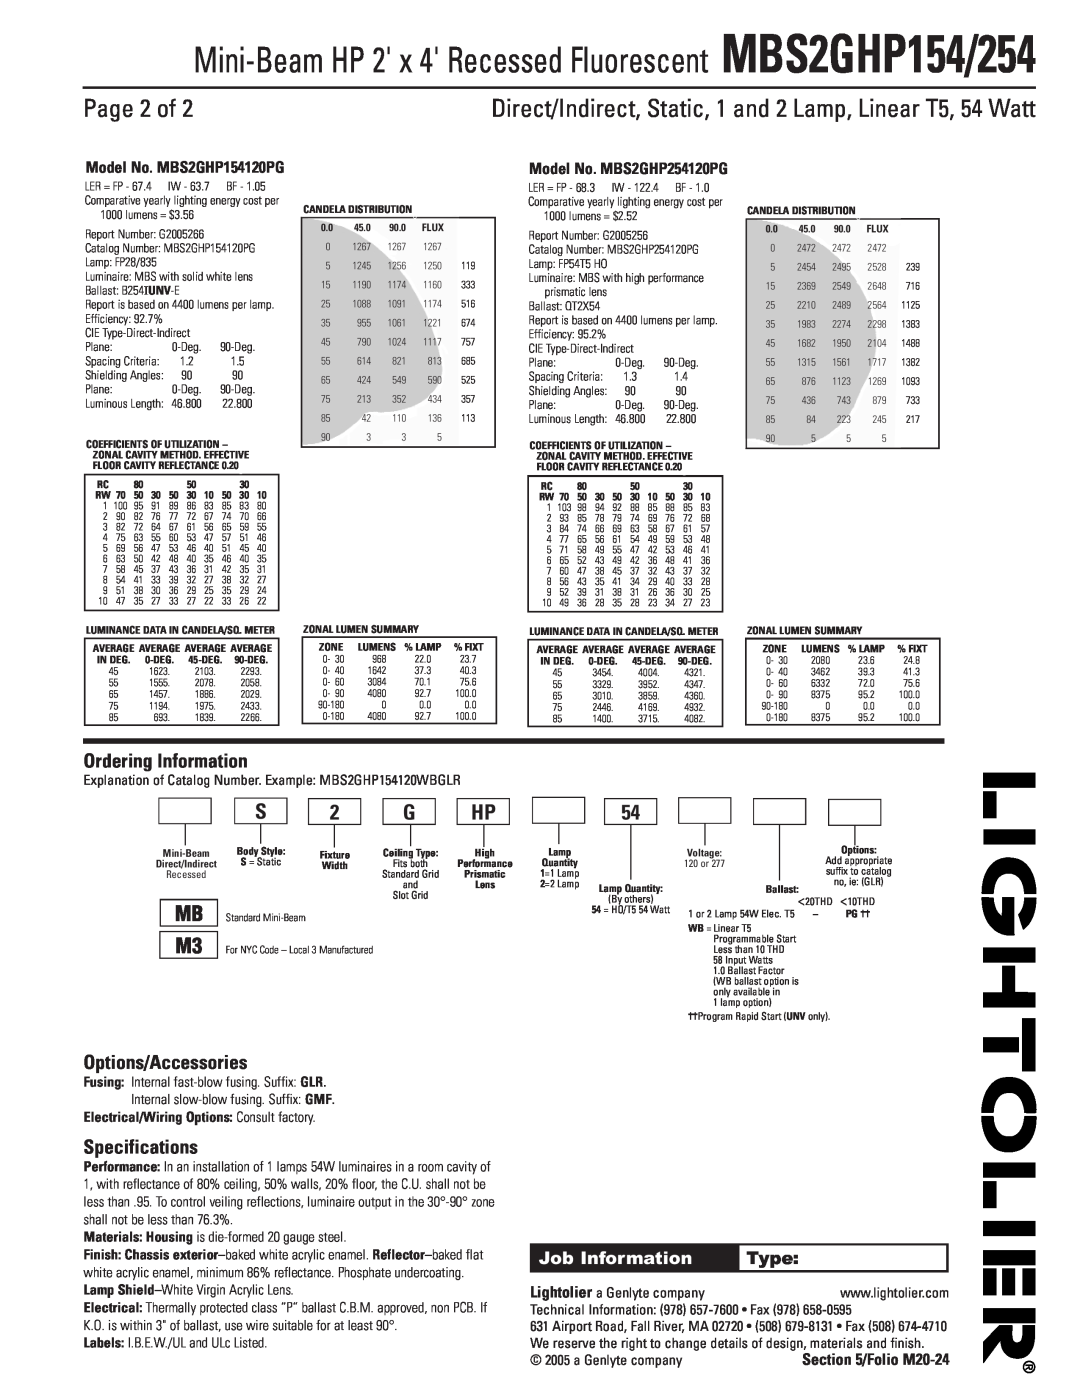 Lightolier MBS2GHP254 Page 2 of, Ordering Information, Options/Accessories, Specifications, Folio M20-24, Job Information 